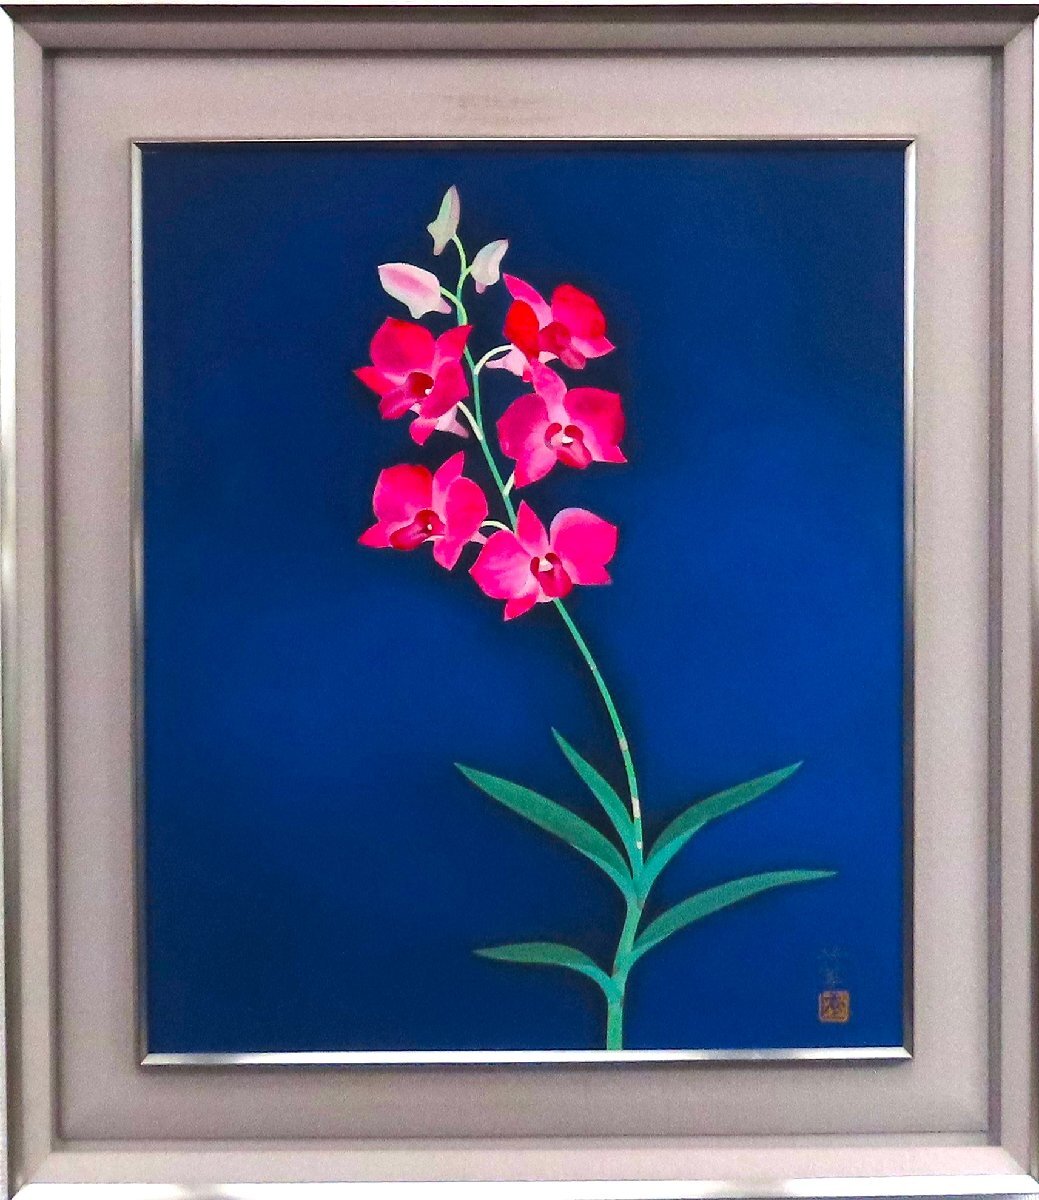 *An elegant and carefully crafted soothing still life painting* Mori Ryokusui No. 10 Orchid Flower ~Studied under Nakamura Gakuryo at the age of 13~ [Reliable and proven Masamitsu Gallery, 5, 000 pieces on display], Painting, Japanese painting, Flowers and Birds, Wildlife